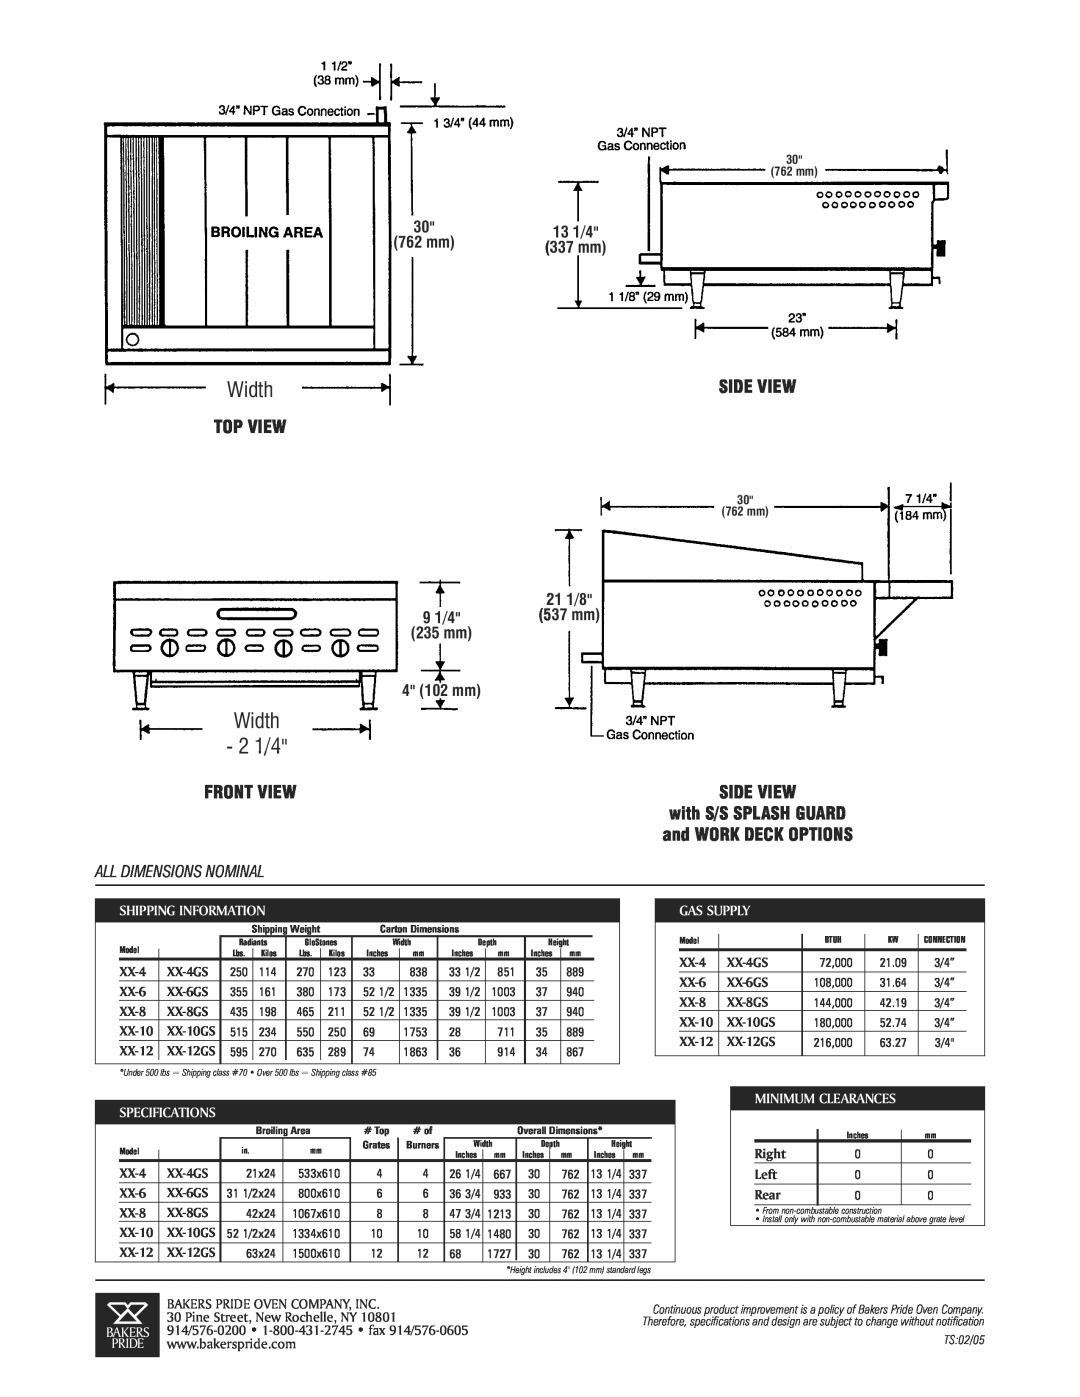 Bakers Pride Oven XX-10 Width, 2 1/4, 13 1/4, 21 1/8, 9 1/4, 537 mm, All Dimensions Nominal, Shipping Information 